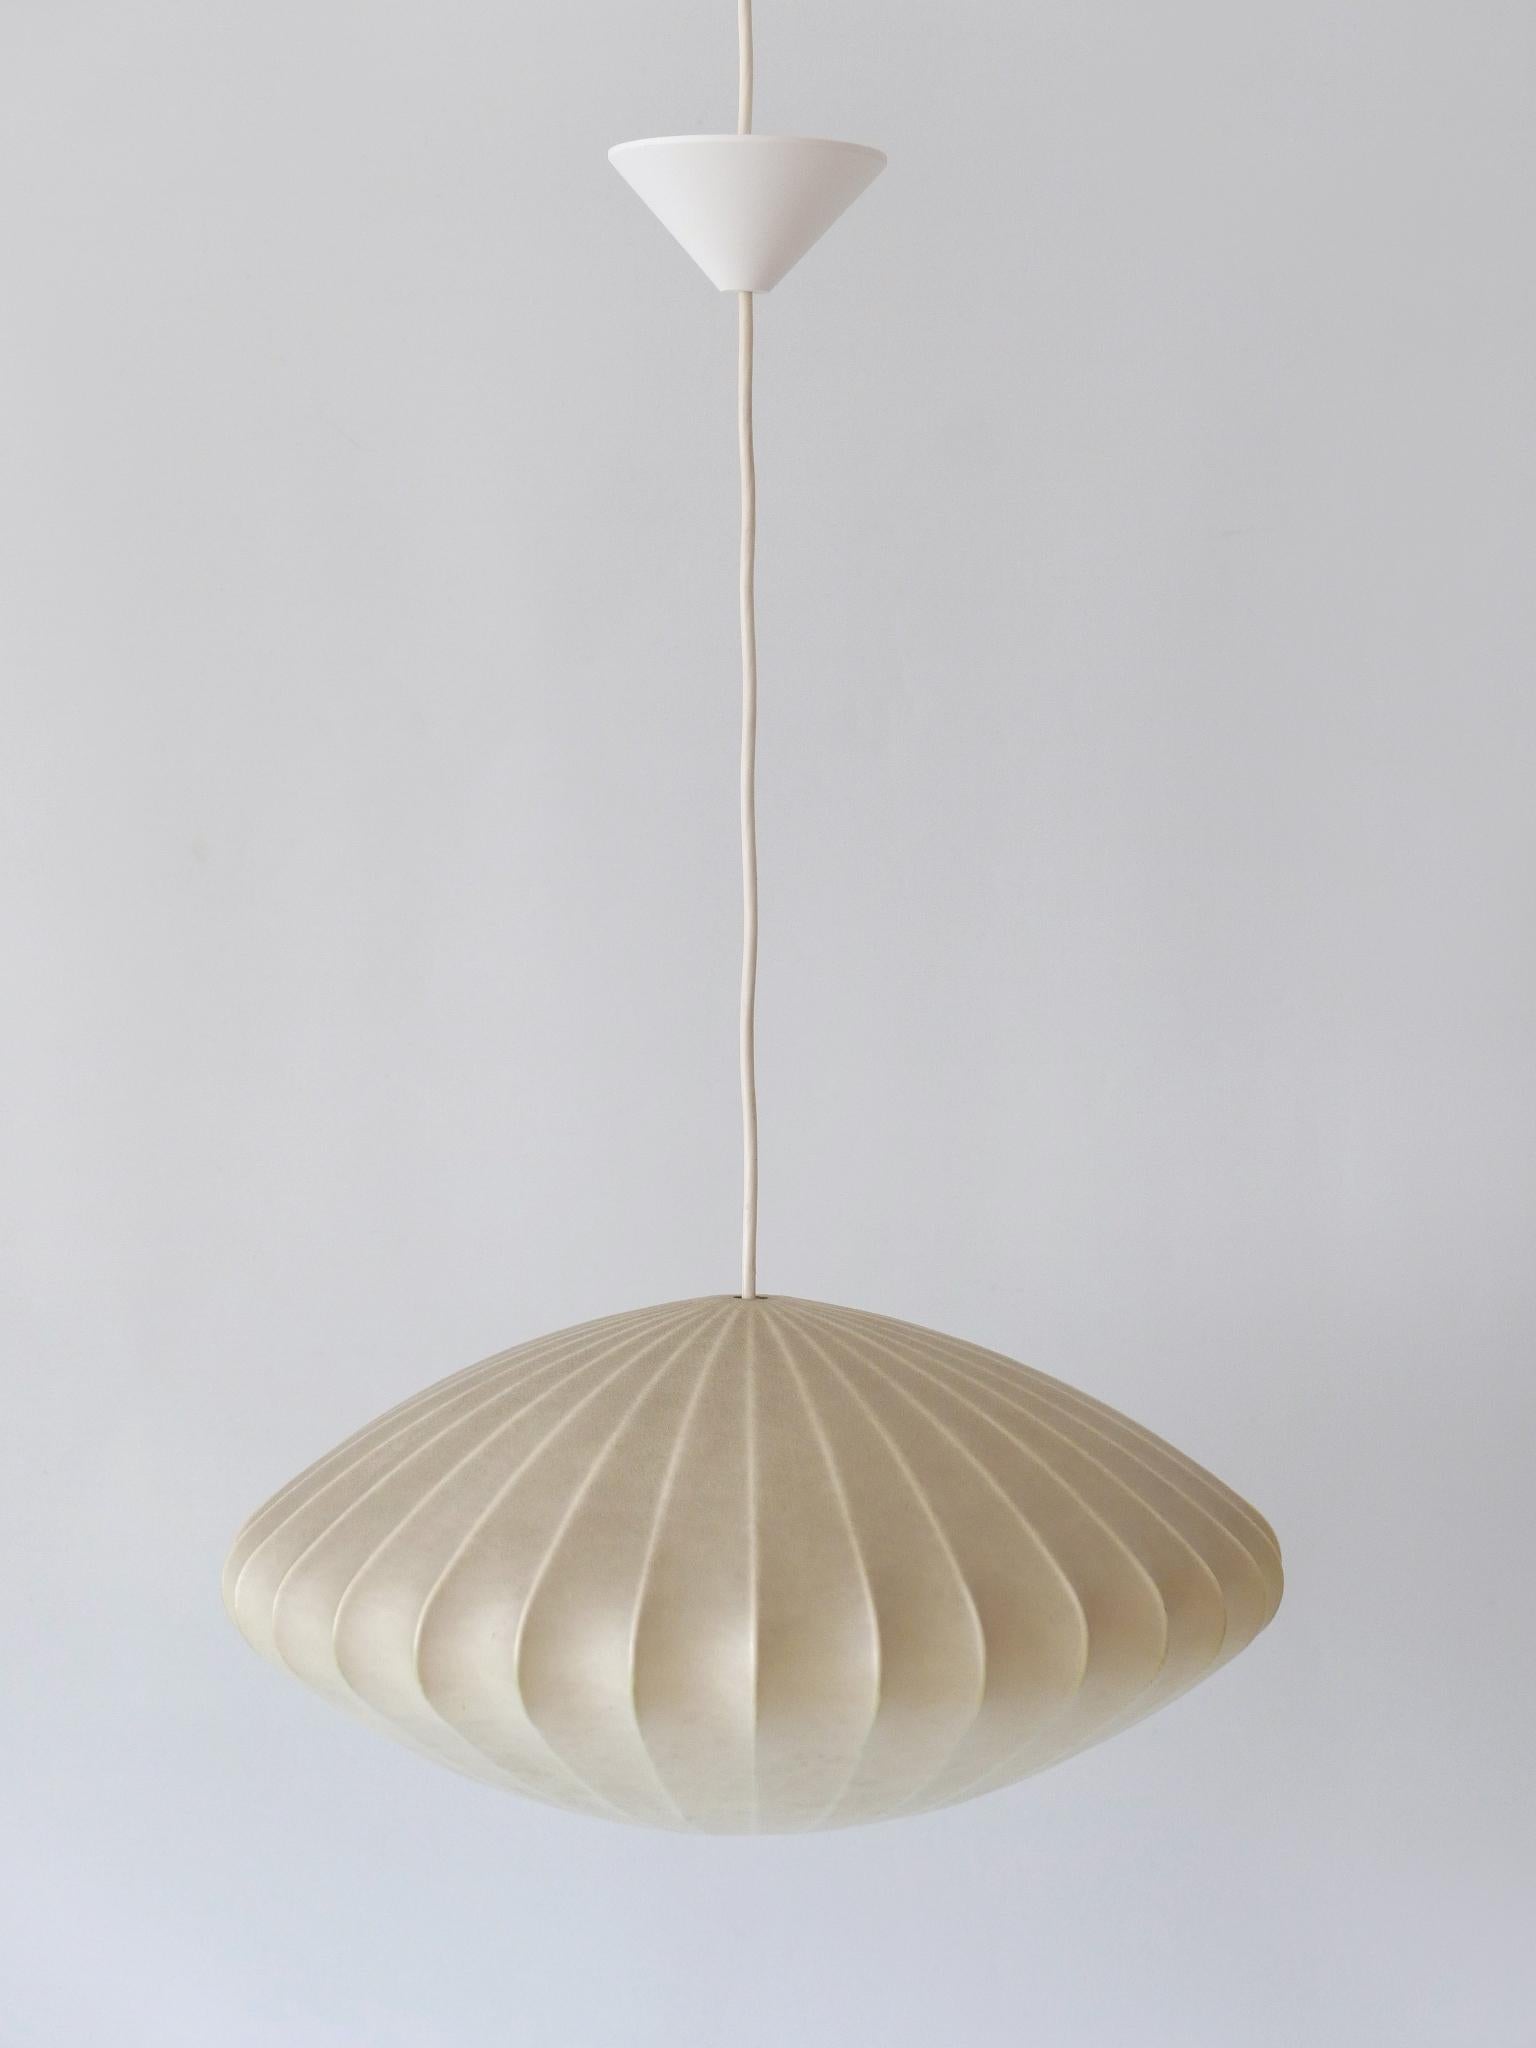 Rare Mid-Century Modern Cocoon Pendant Lamp or Hanging Light by Goldkant 1960s For Sale 6